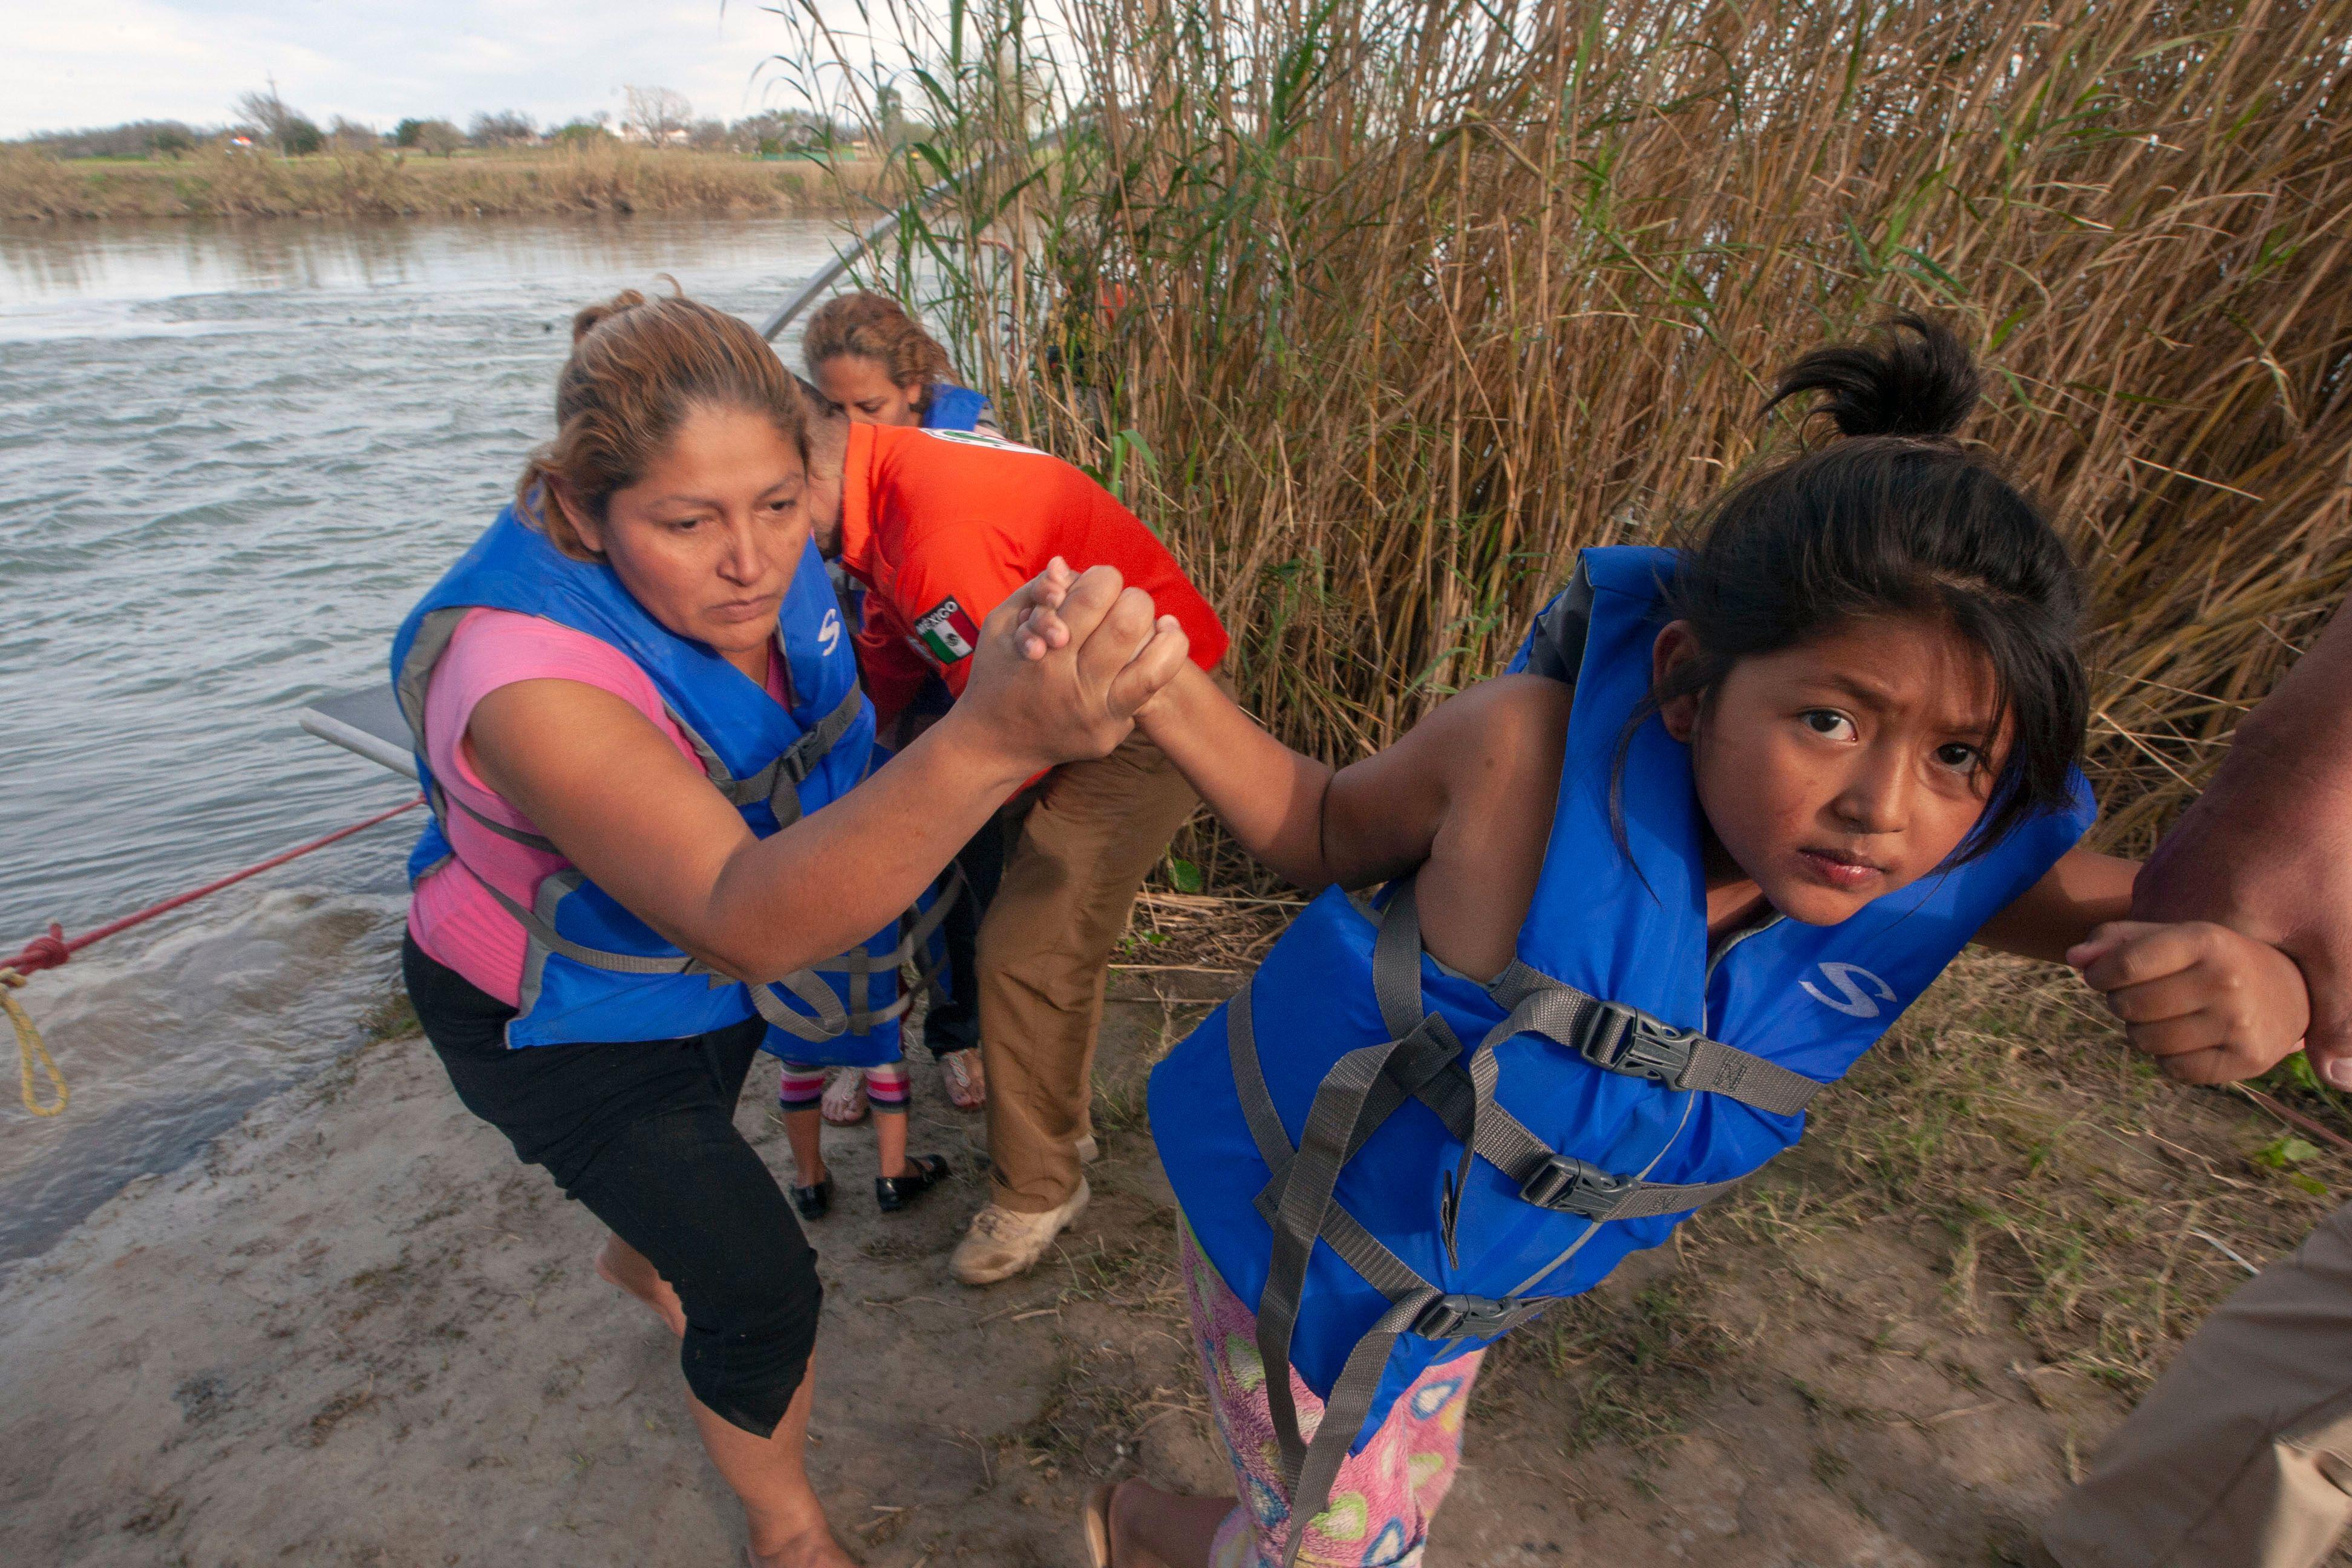 Central American migrants are rescued by members of the Beta group of the National Mexican Institute of Migration, dedicated to the protection and defense of the human rights of migrants, as they were trying to cross the Rio Bravo, which divides the cities of Eagle Pass, Texas and Piedras Negras, in Coahuila state, Mexico, on February 15, 2019.